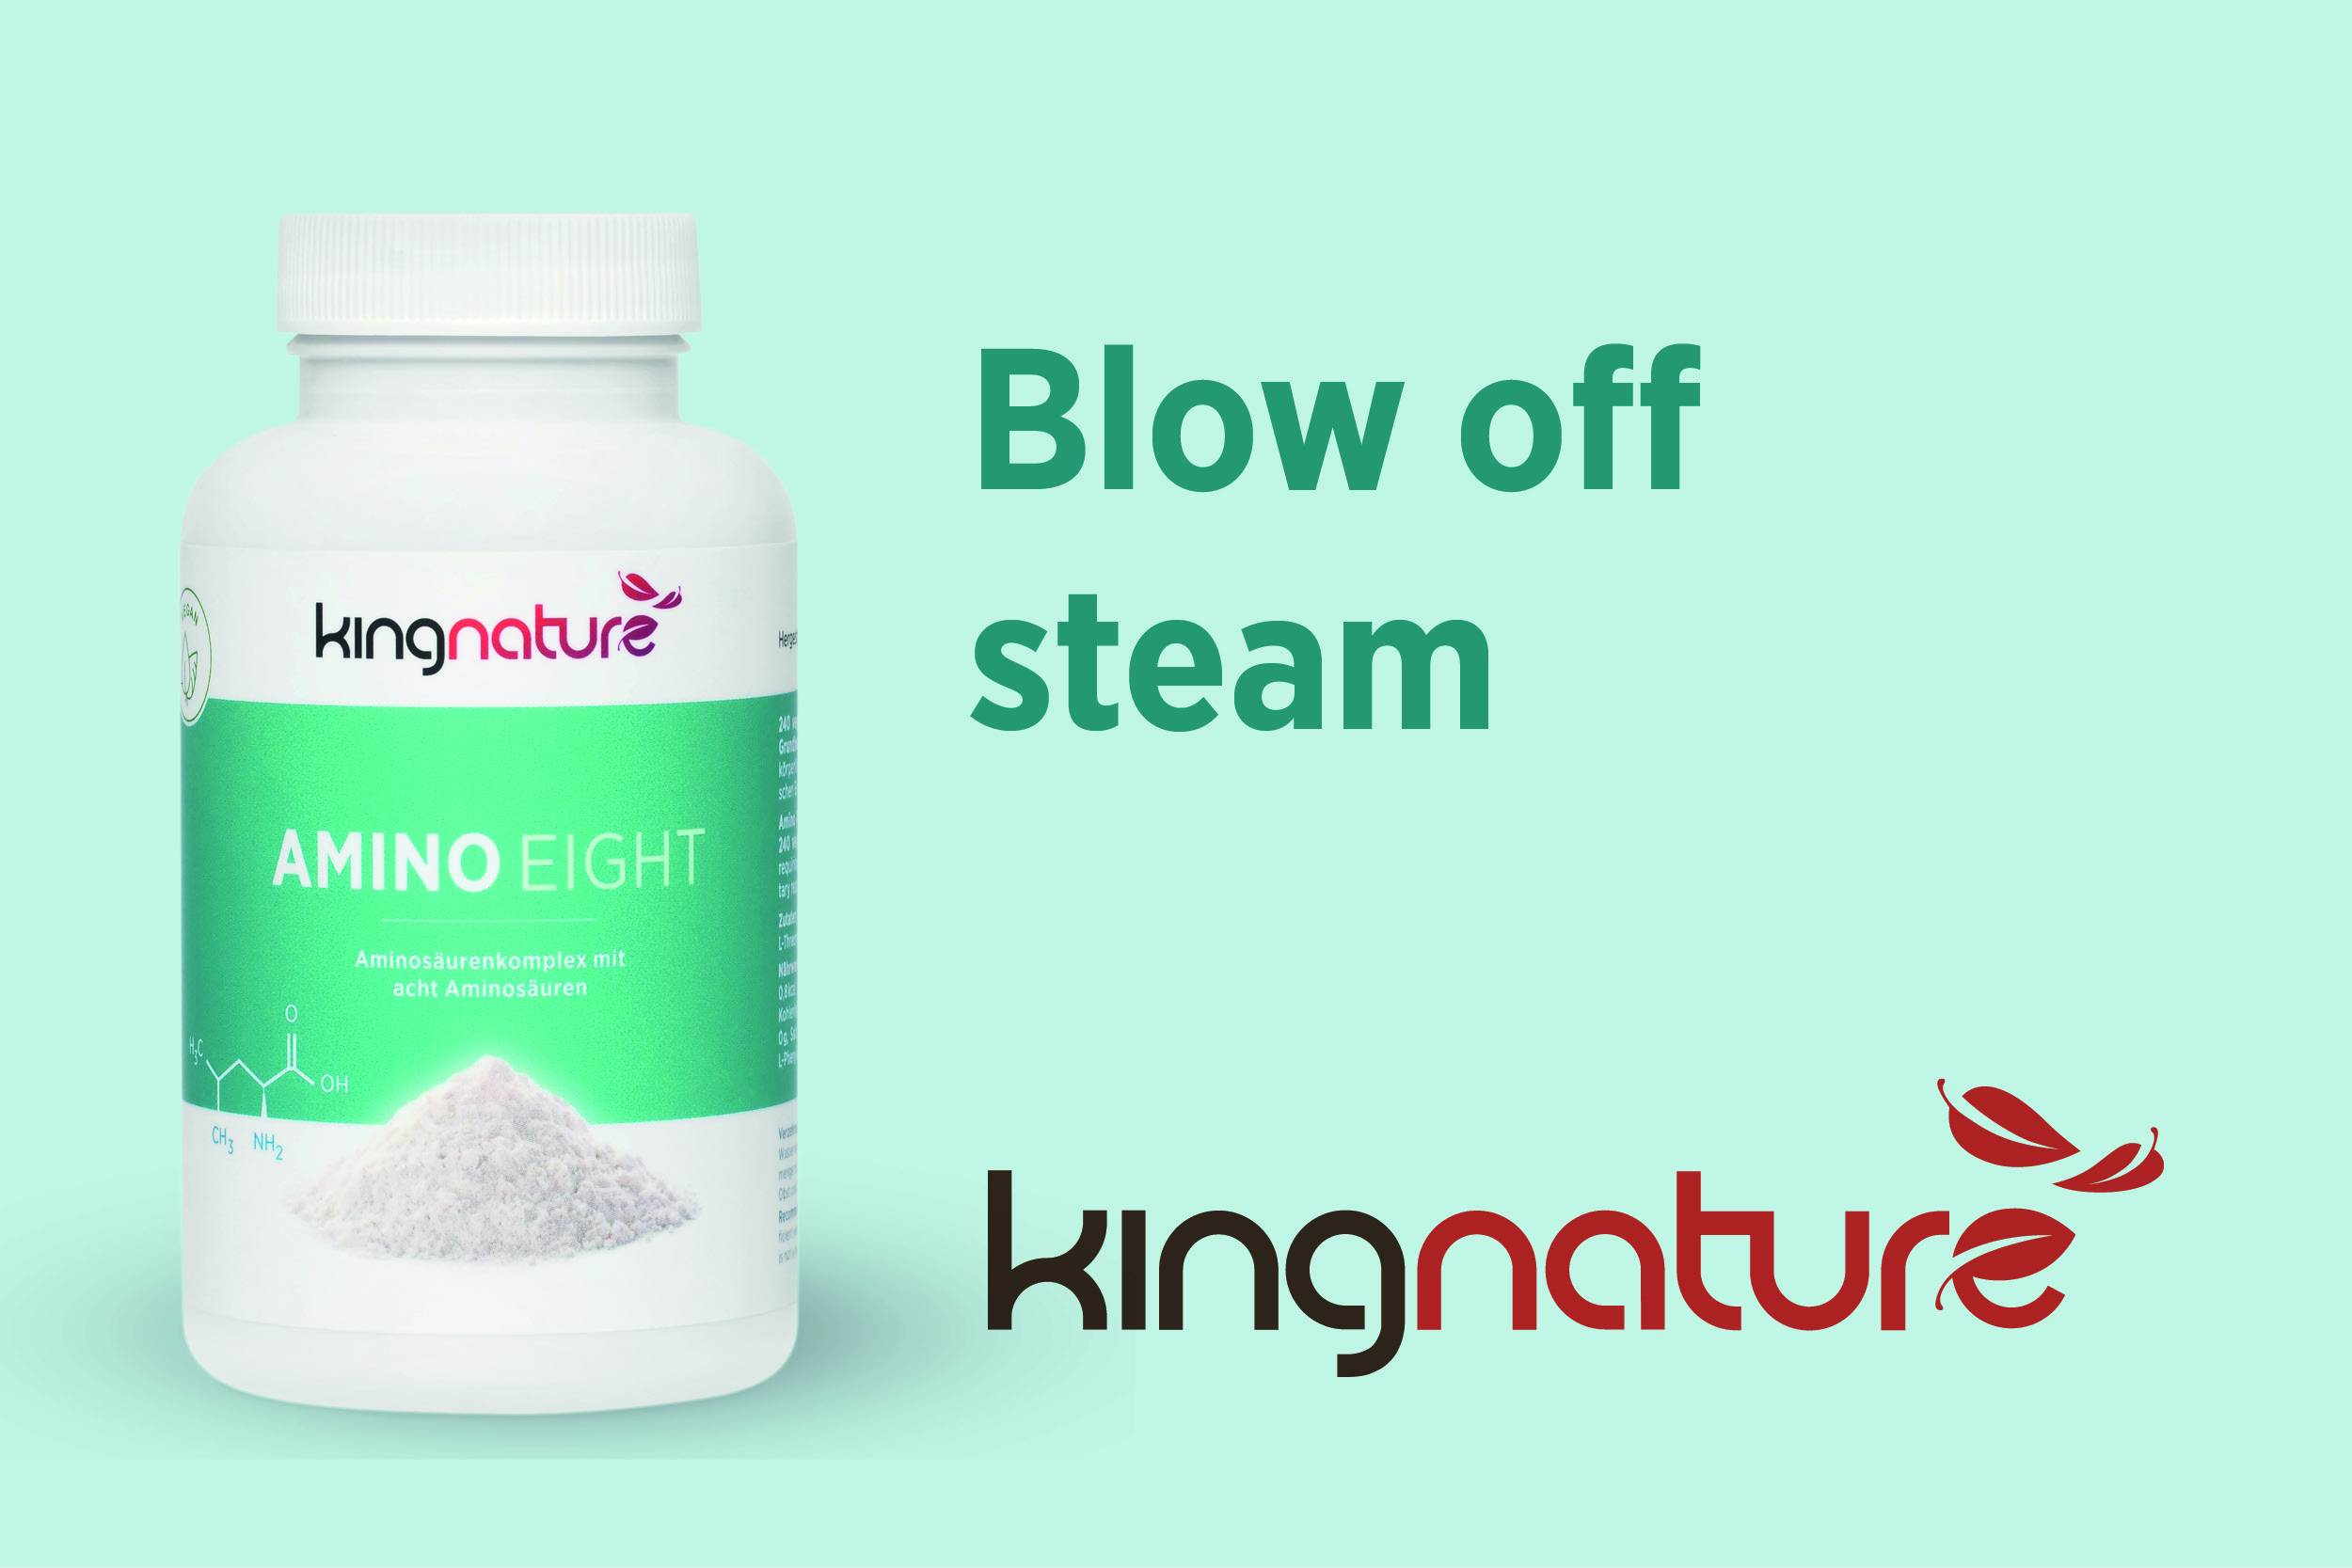 Amino Eight, Blow off steam